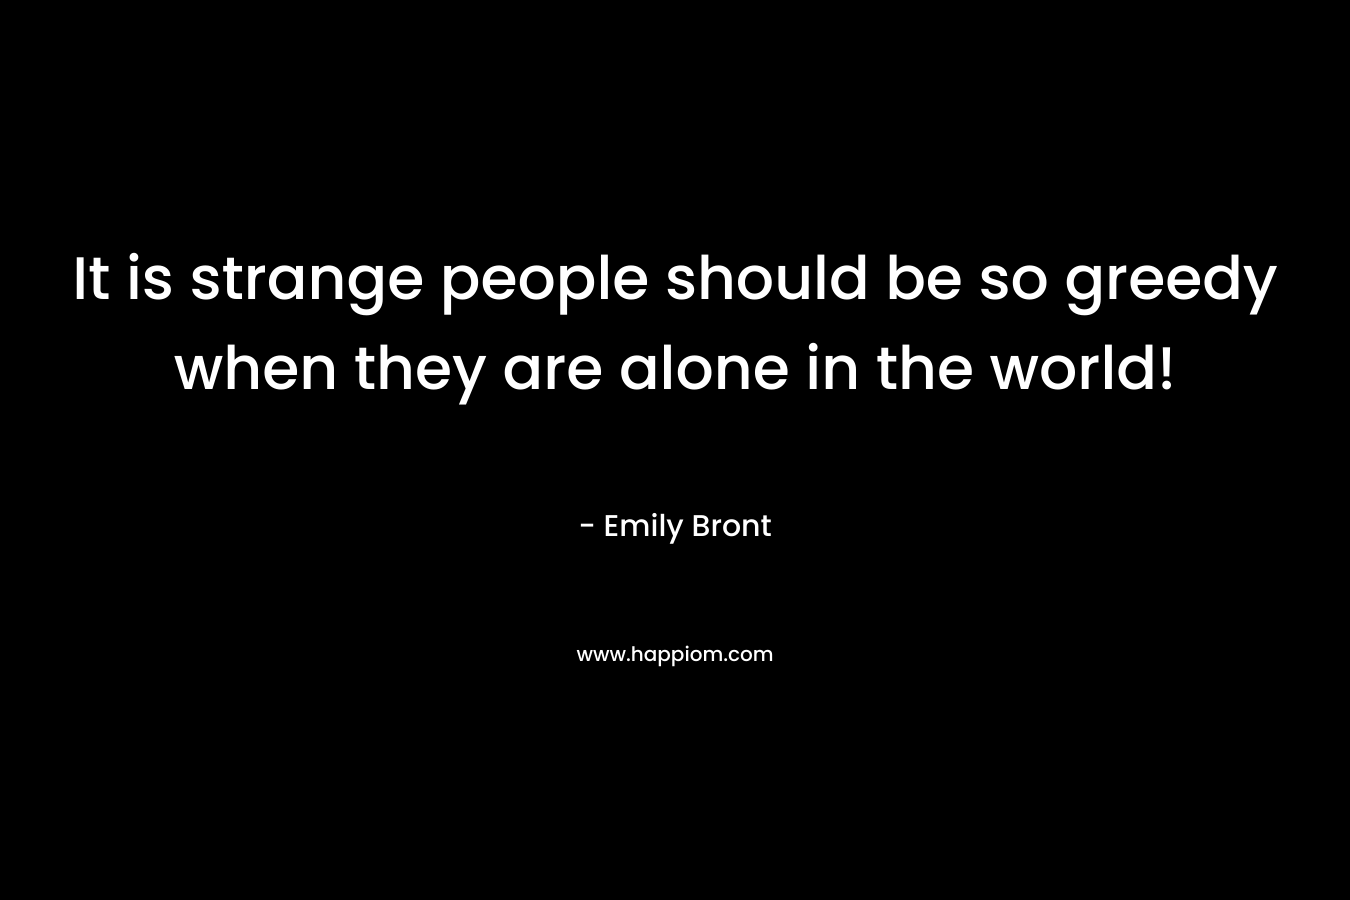 It is strange people should be so greedy when they are alone in the world! – Emily Bront